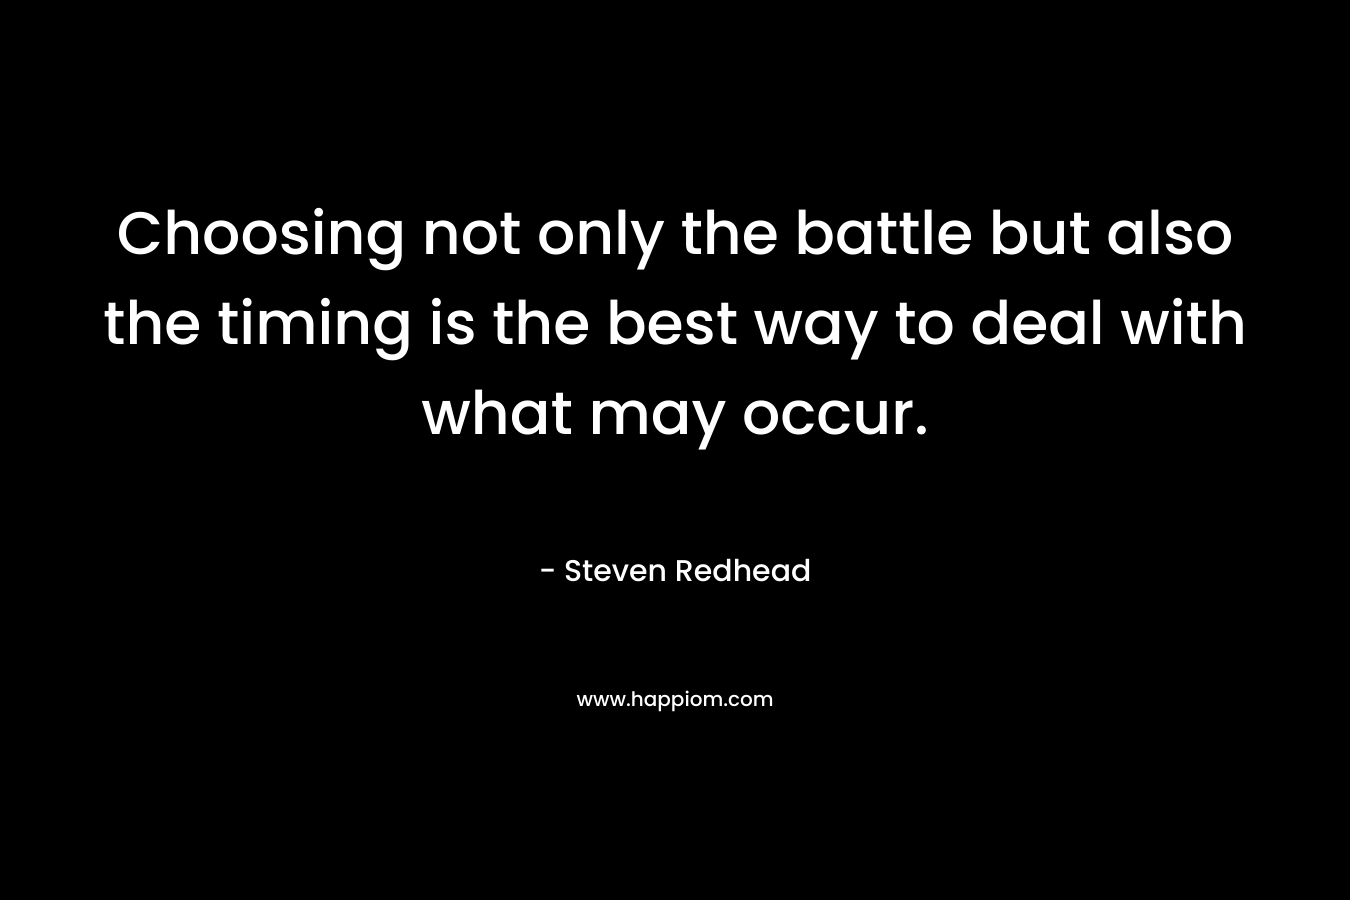 Choosing not only the battle but also the timing is the best way to deal with what may occur.